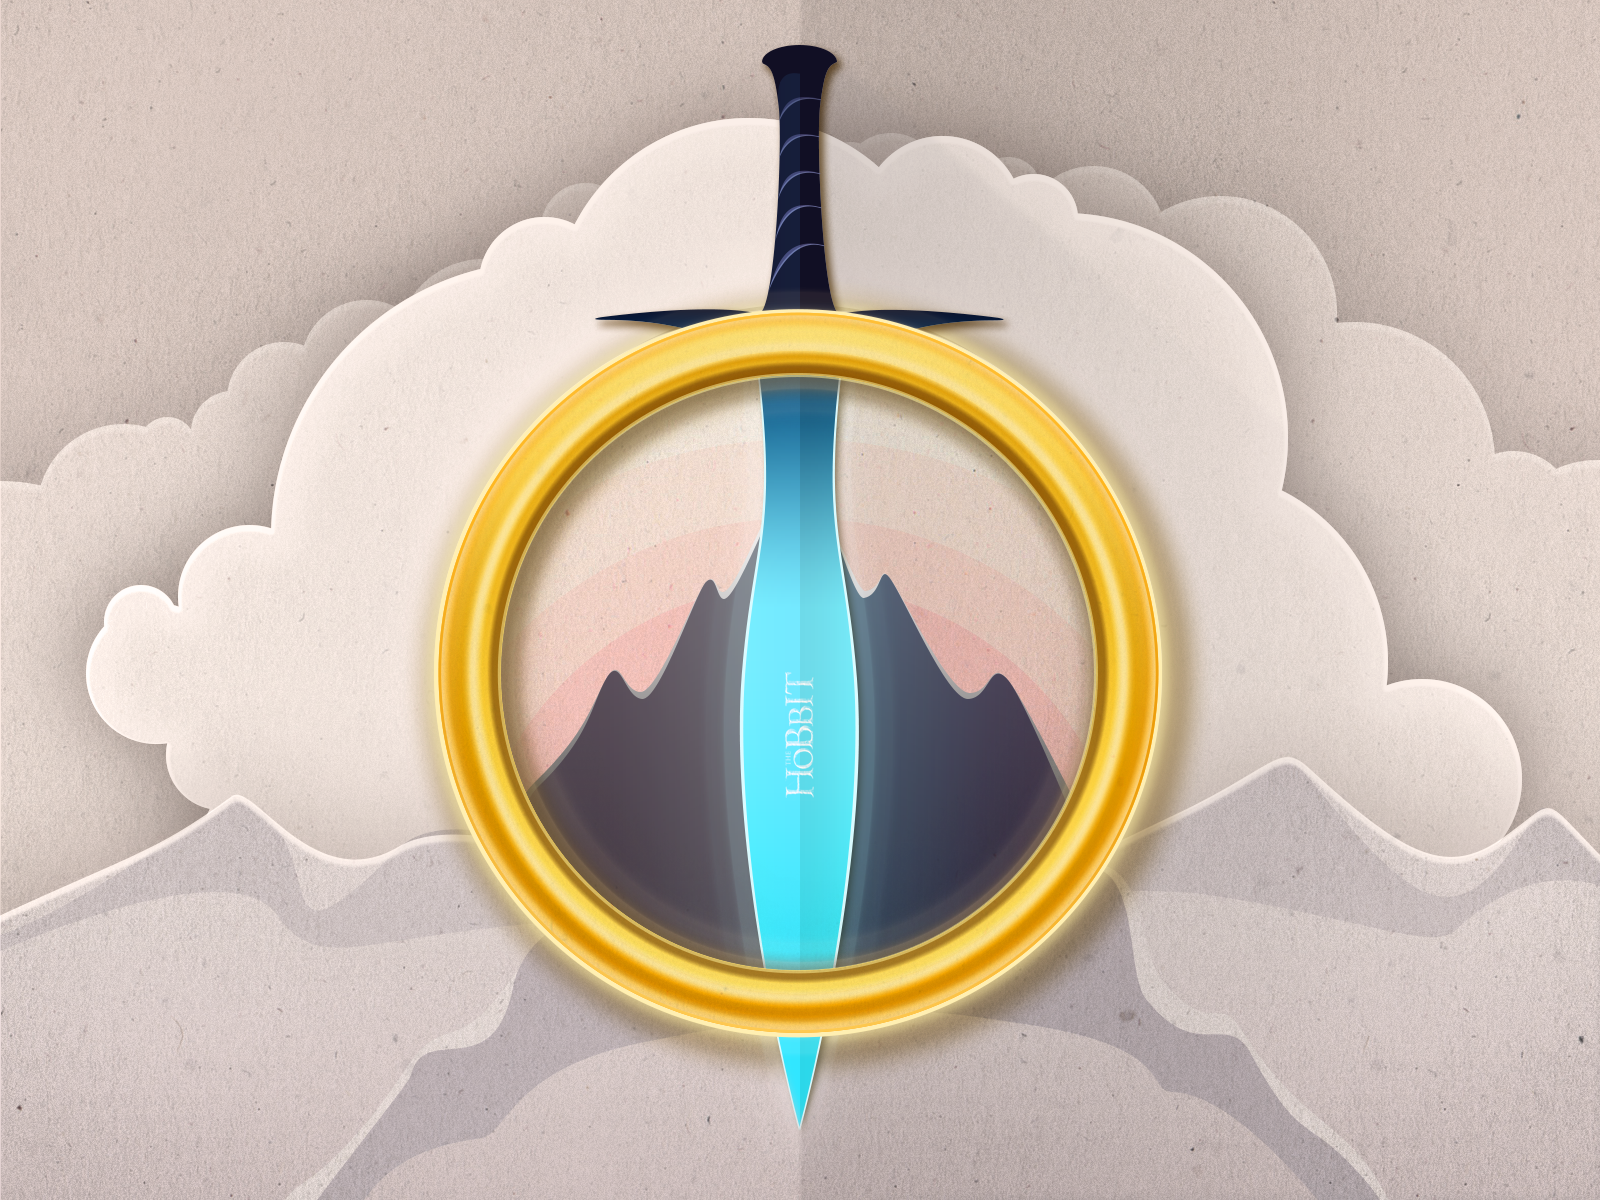 The Hobbit by ILLUSTRATE - X on Dribbble